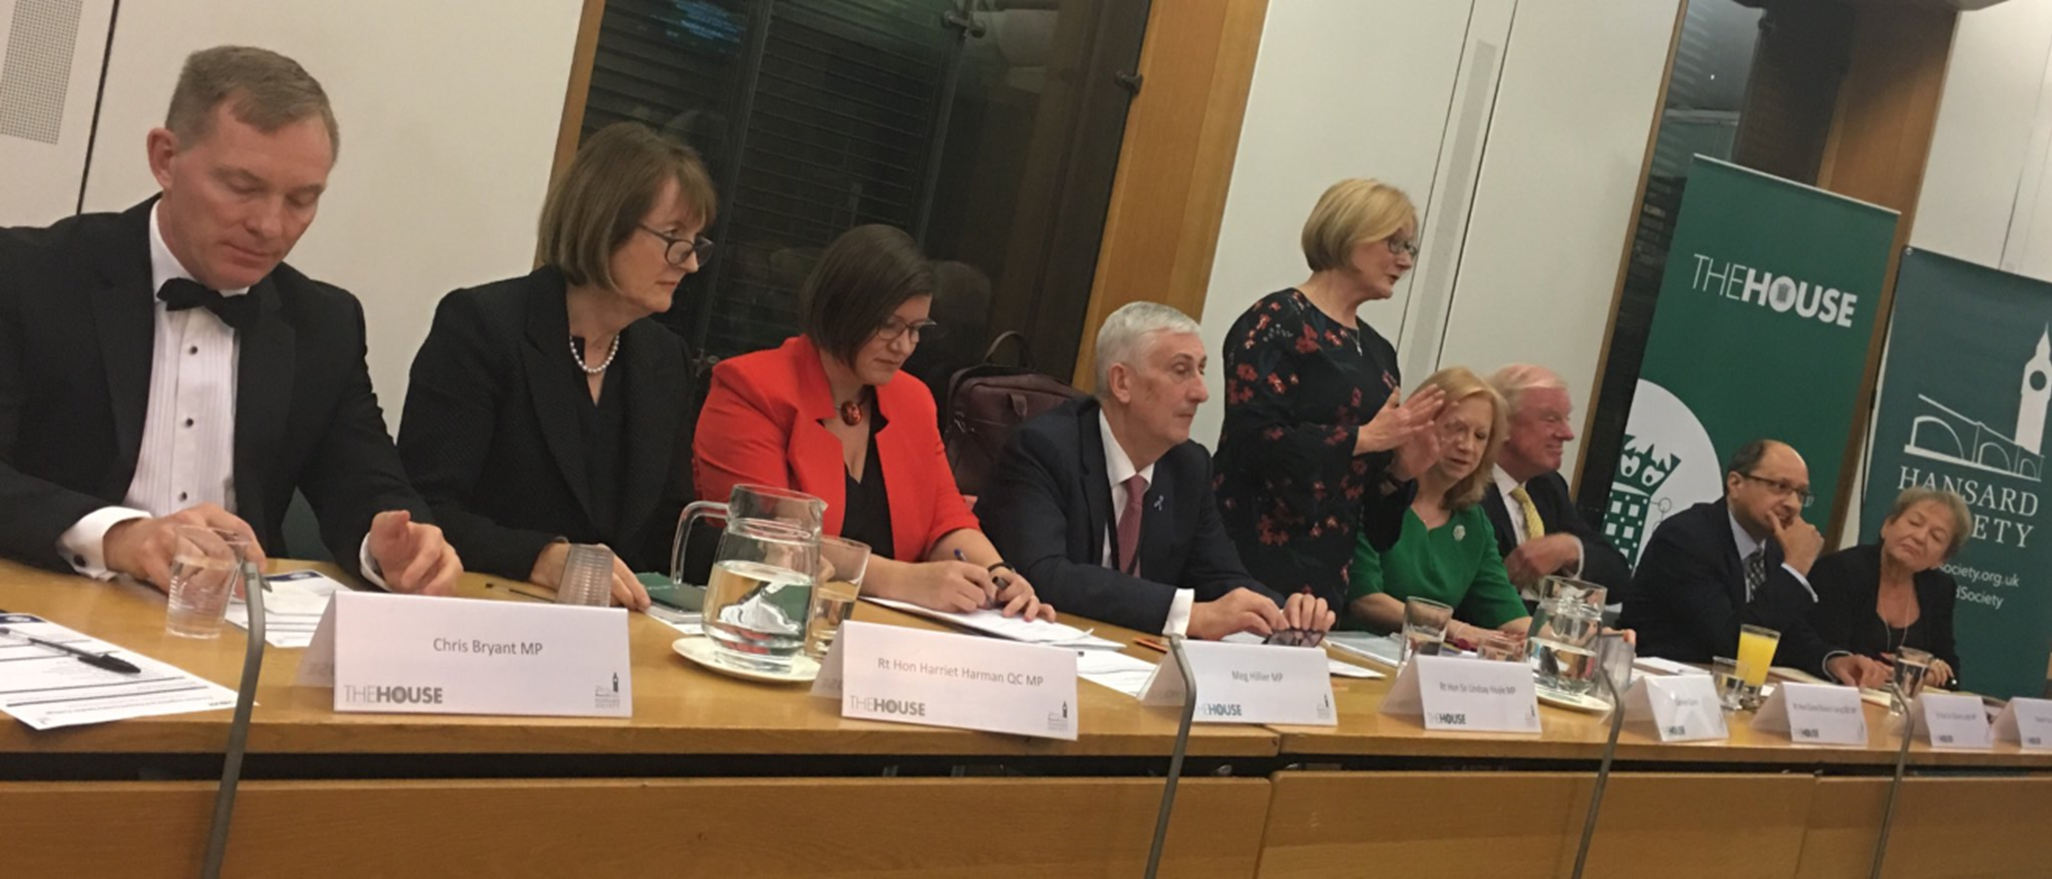 Cross-party hustings for the election of the Speaker of the House of Commons co-hosted by the Hansard Society and House Magazine on 15 October 2019, chaired by Carolyn Quinn, presenter of BBC Radio 4's 'Westminster Hour'